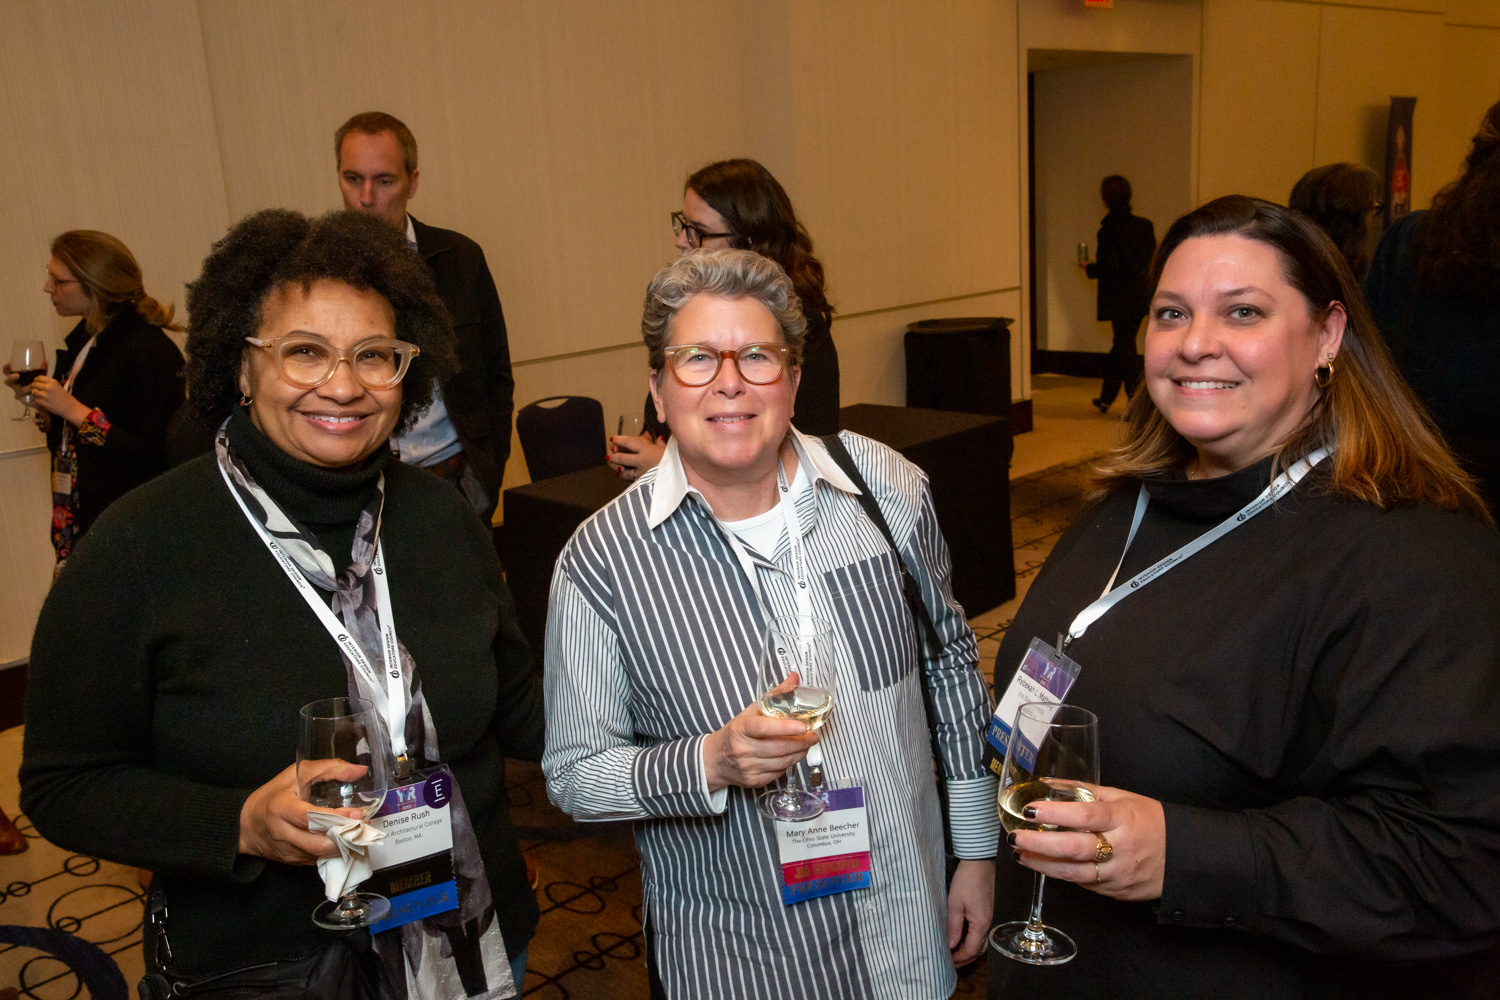 Conference-goers posing while holding wine glasses.